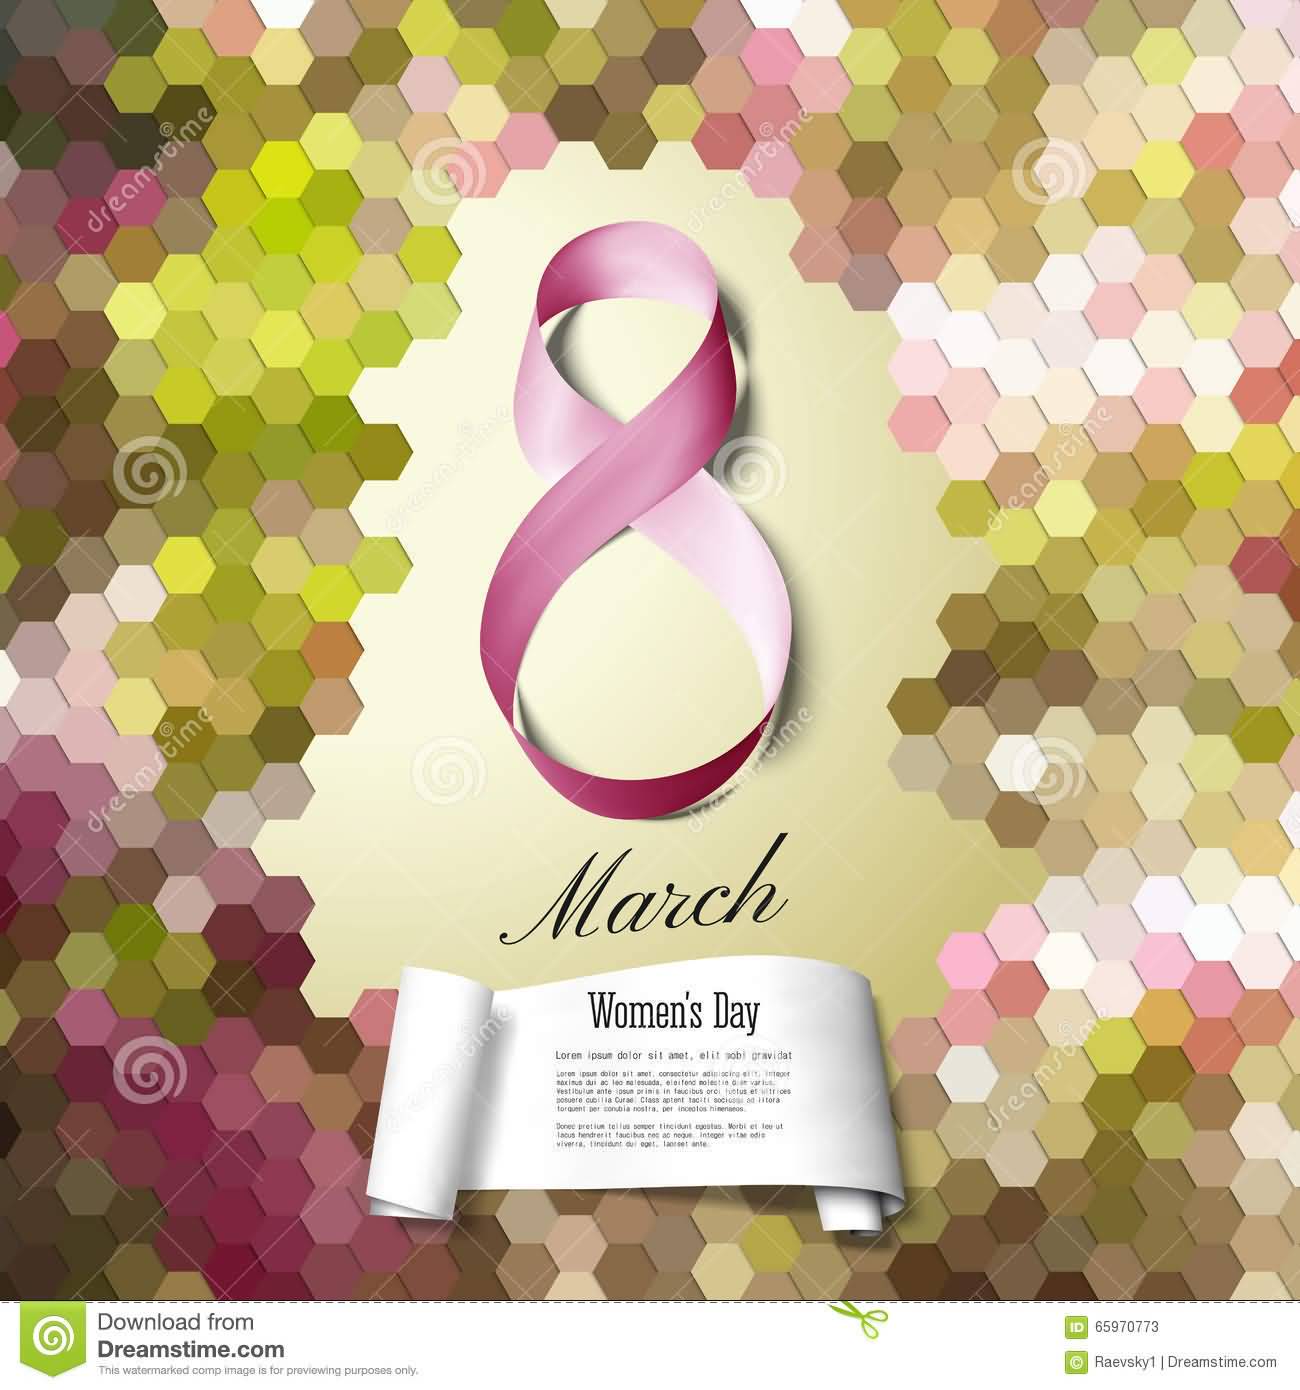 8 March Women's Day Greeting Card With Symbol Of Pink Ribbon